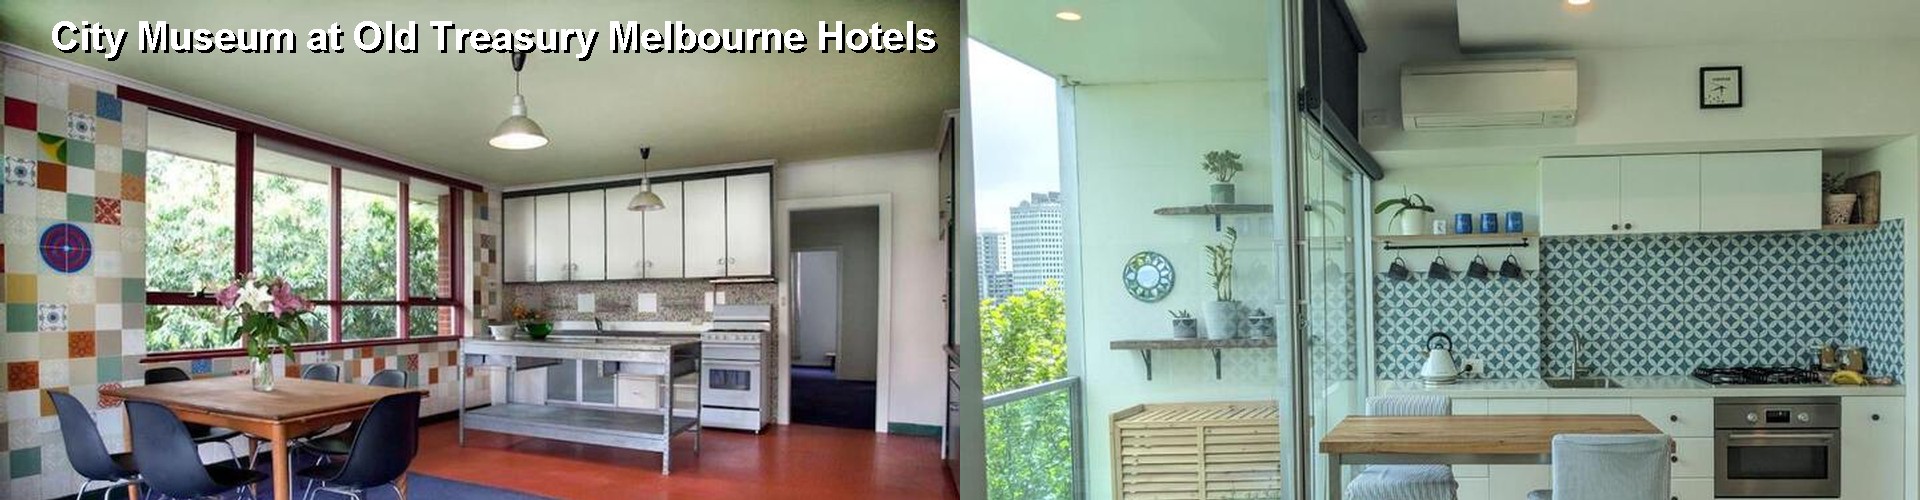 5 Best Hotels near City Museum at Old Treasury Melbourne